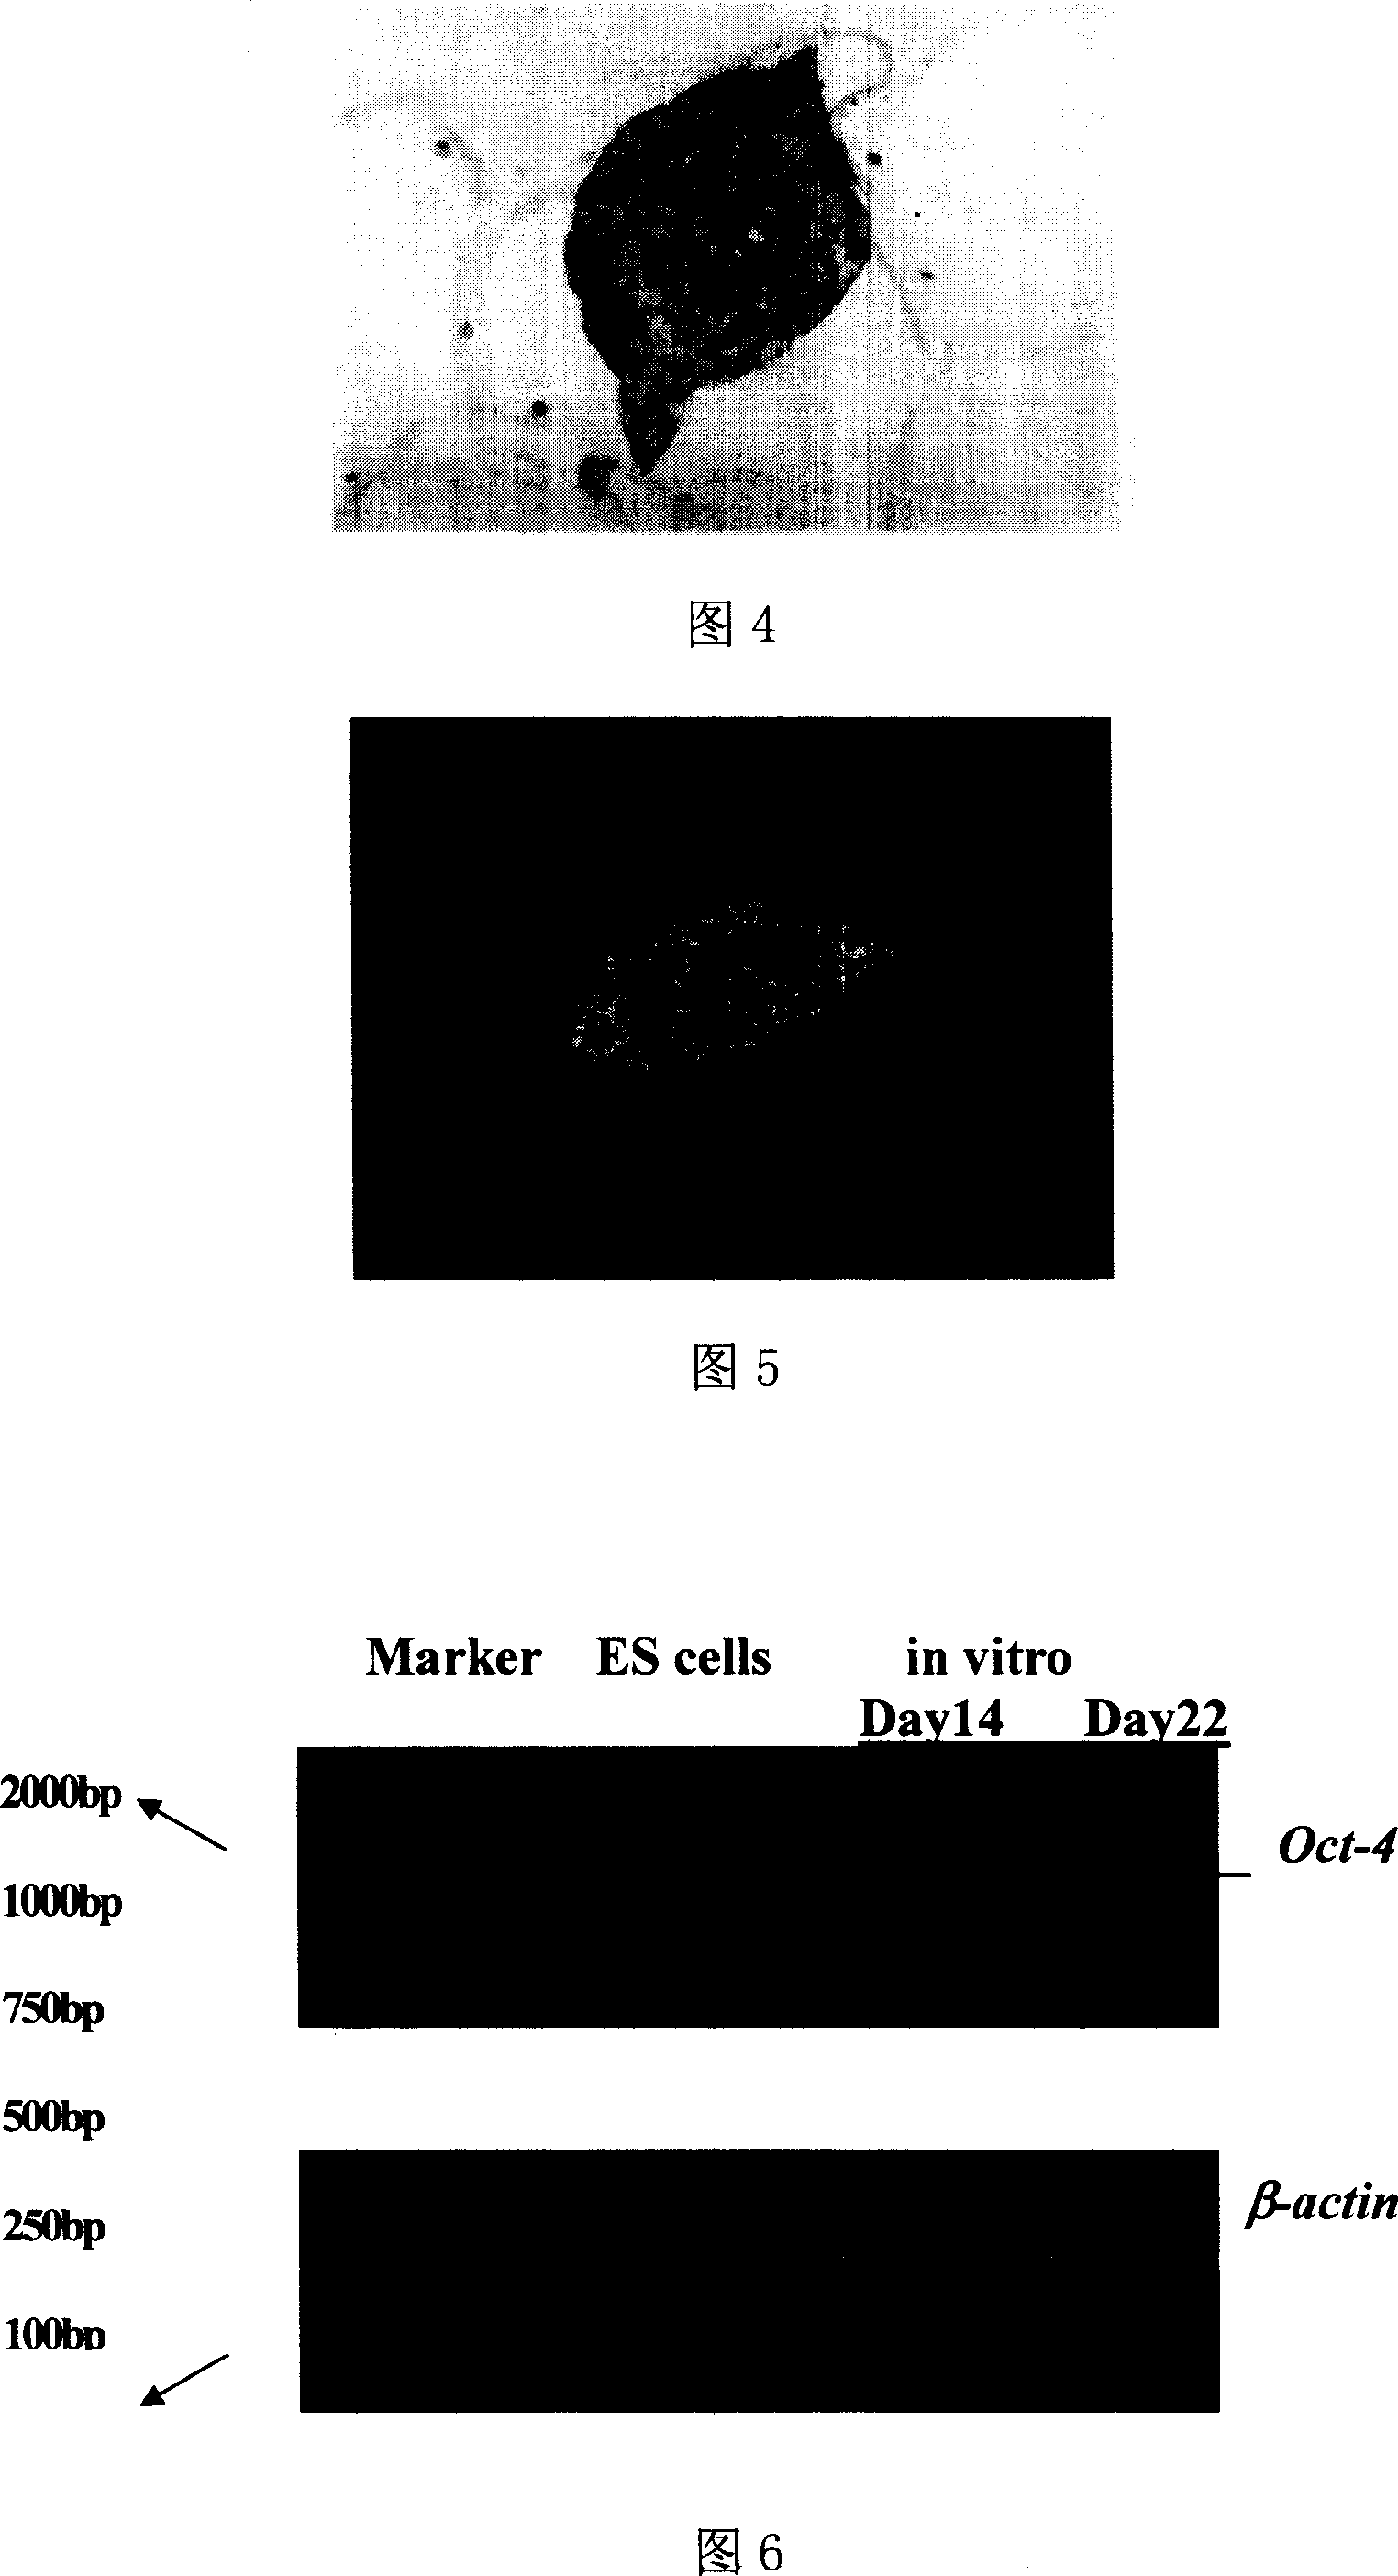 Method for construction of stem cell in-vitro multiplication and differentiation microenvironment